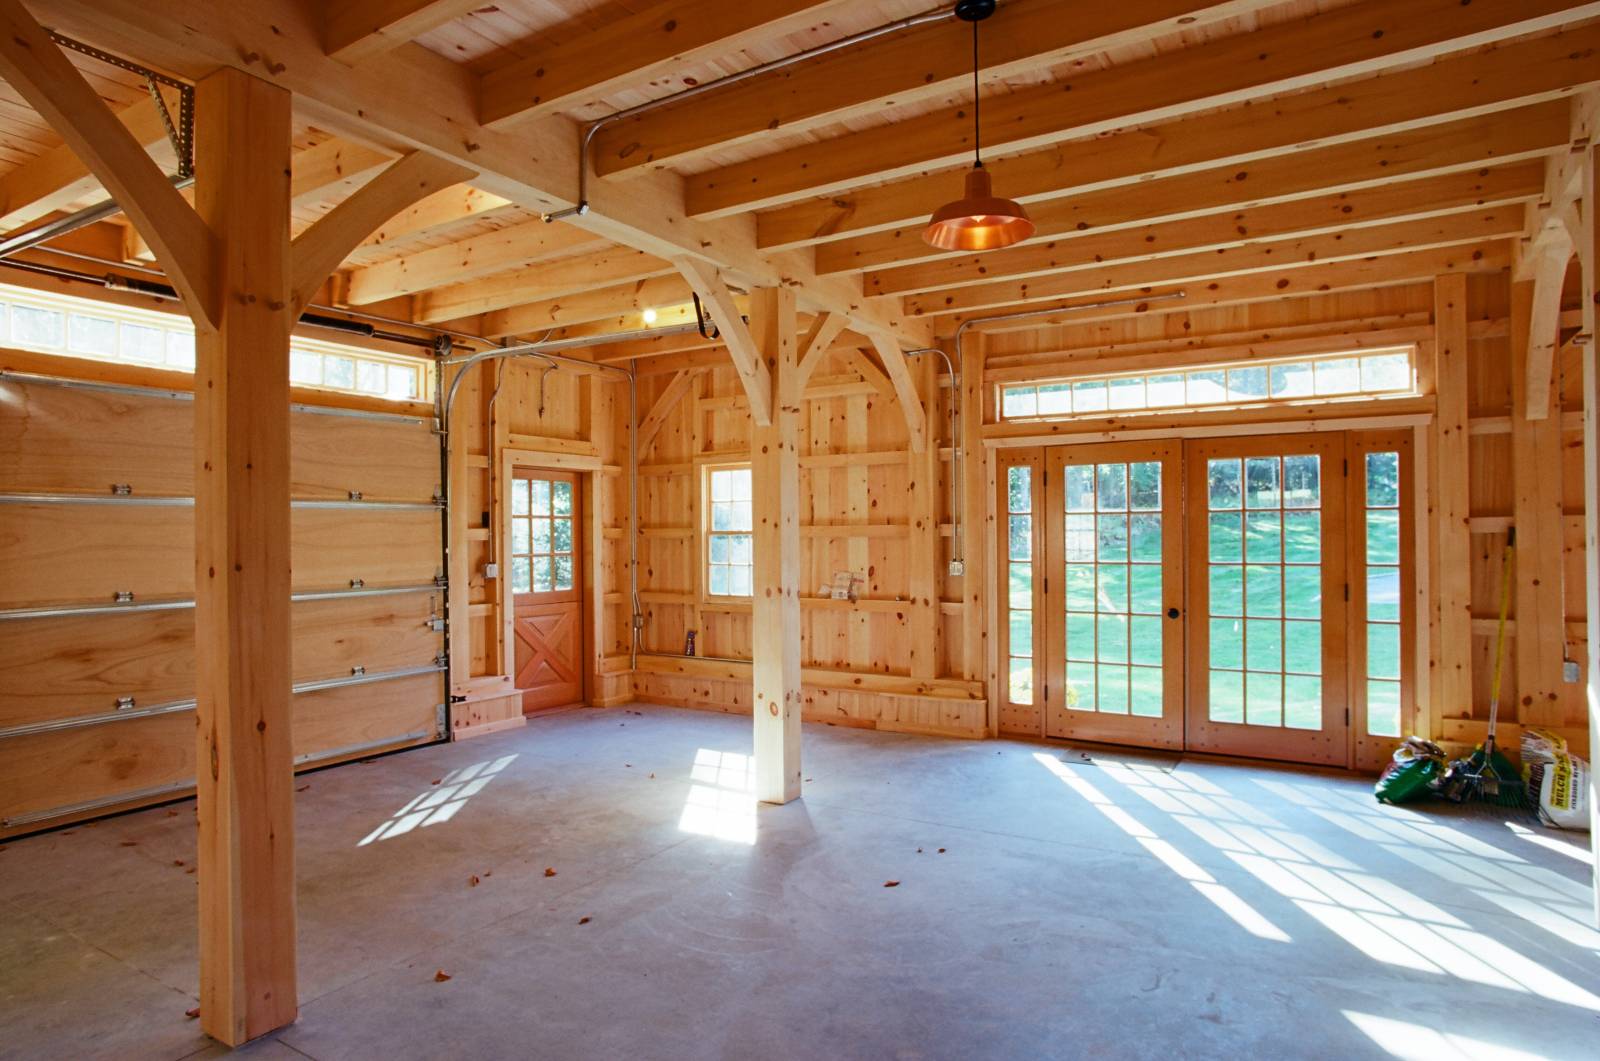 First floor of the bank barn with light streaming in and exposed beams